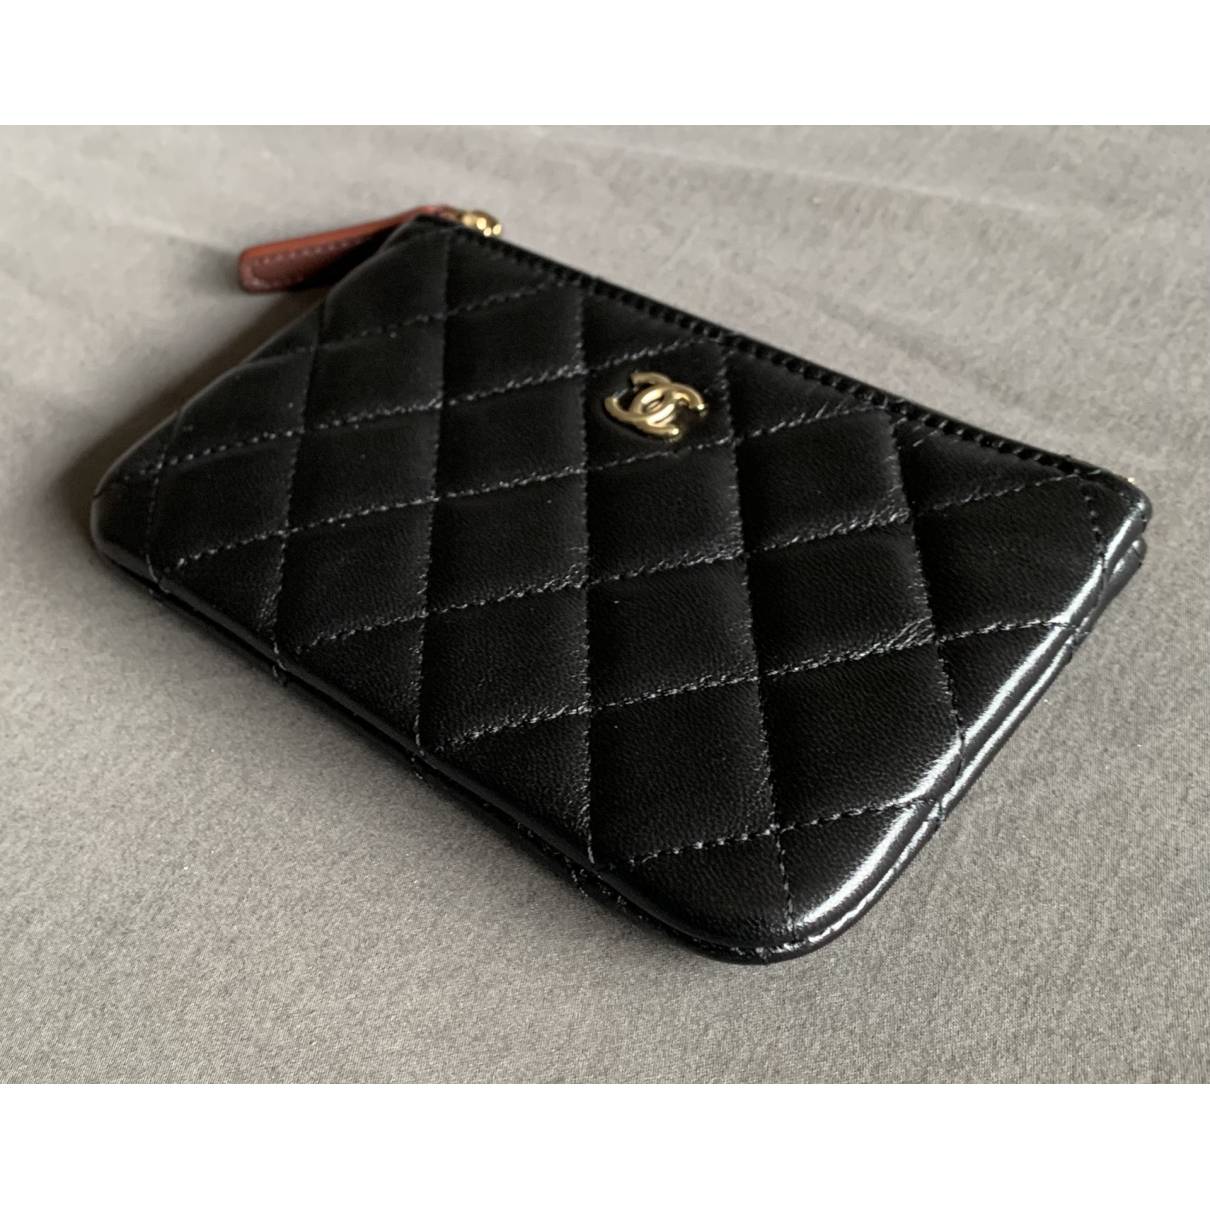 Chanel Coin Purse Prices